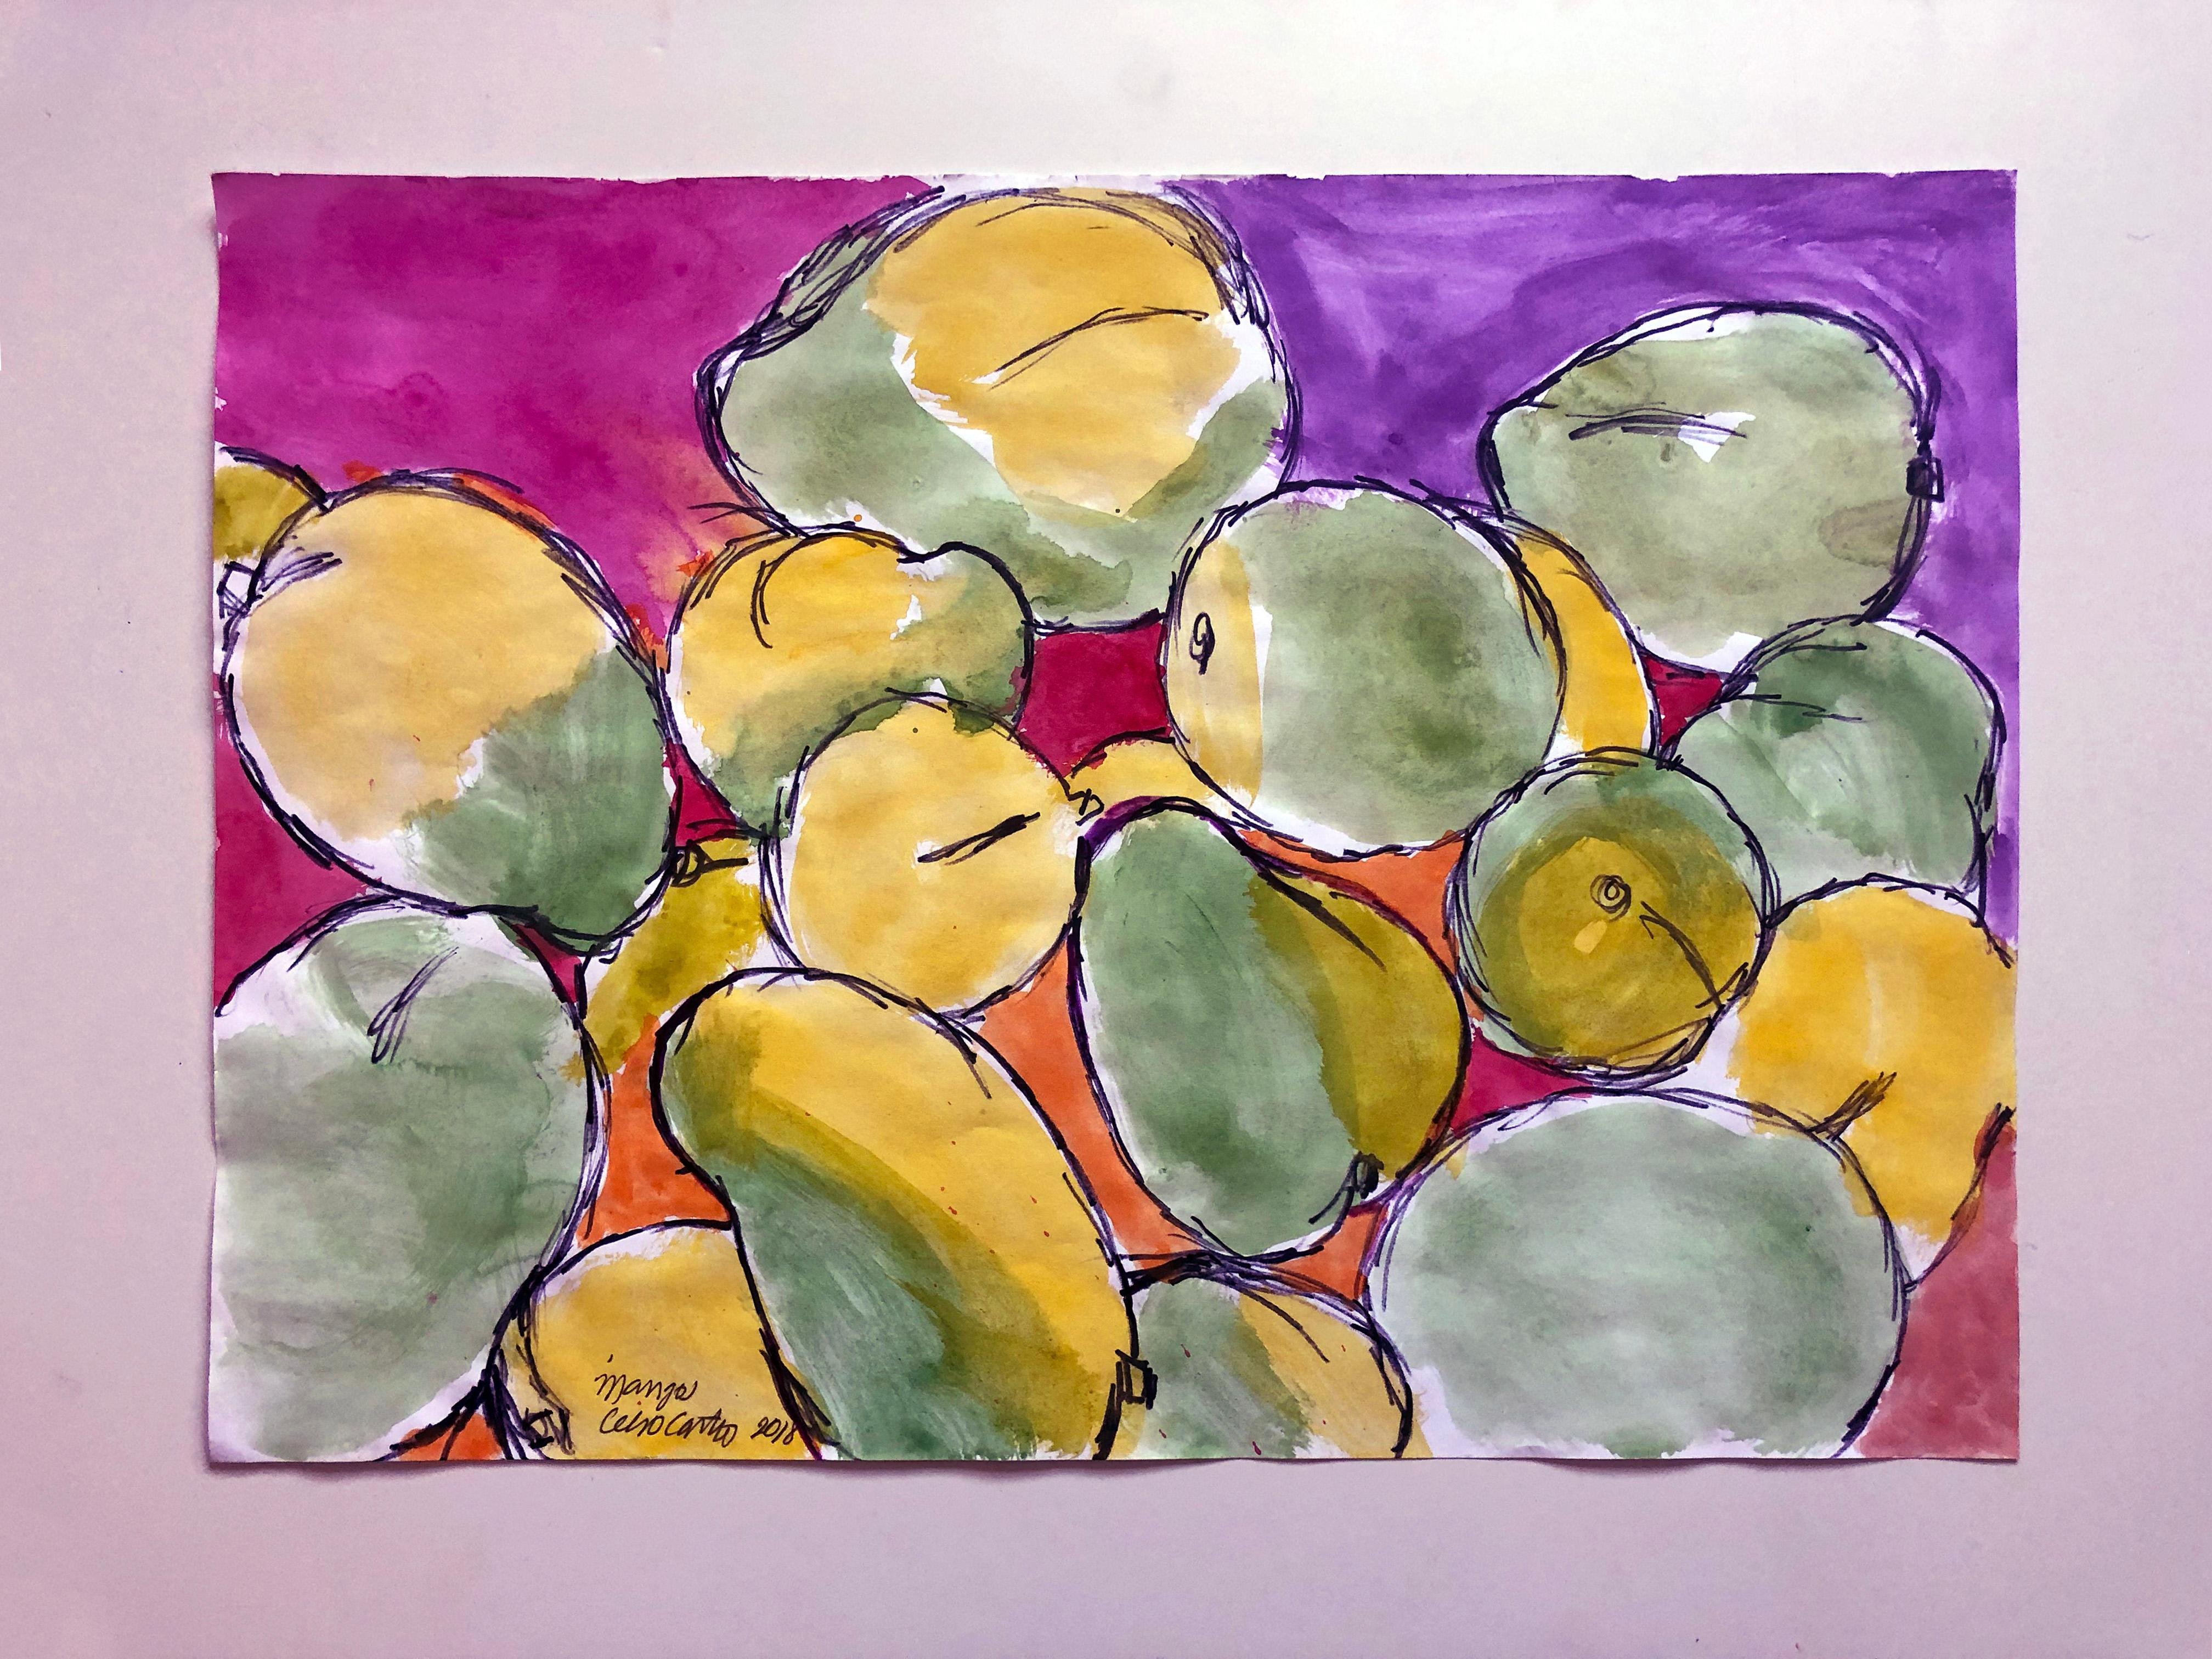 Mangos by Celso Castro
Watercolor and ink on archival paper
Individual size: 19.38 in. H x 13.5 in. W
Overall size: 19.38 in. H x 27 in. W
One of a kind
2018

Celso Castro-Daza was born in Valledupar, Colombia. He has a BFA from Pratt